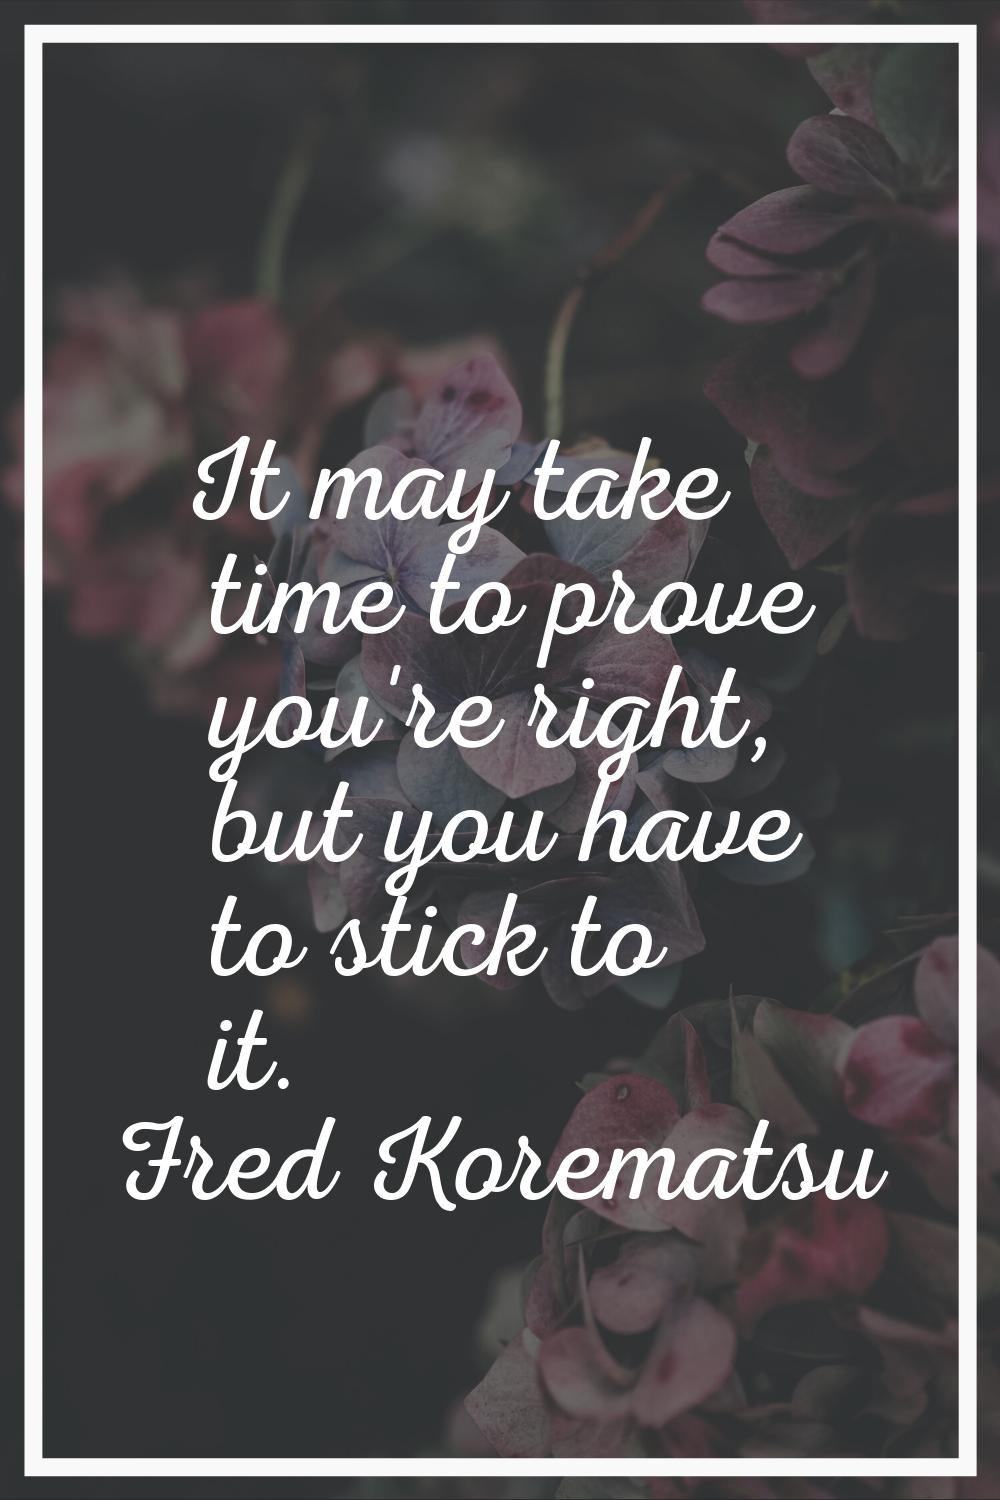 It may take time to prove you're right, but you have to stick to it.